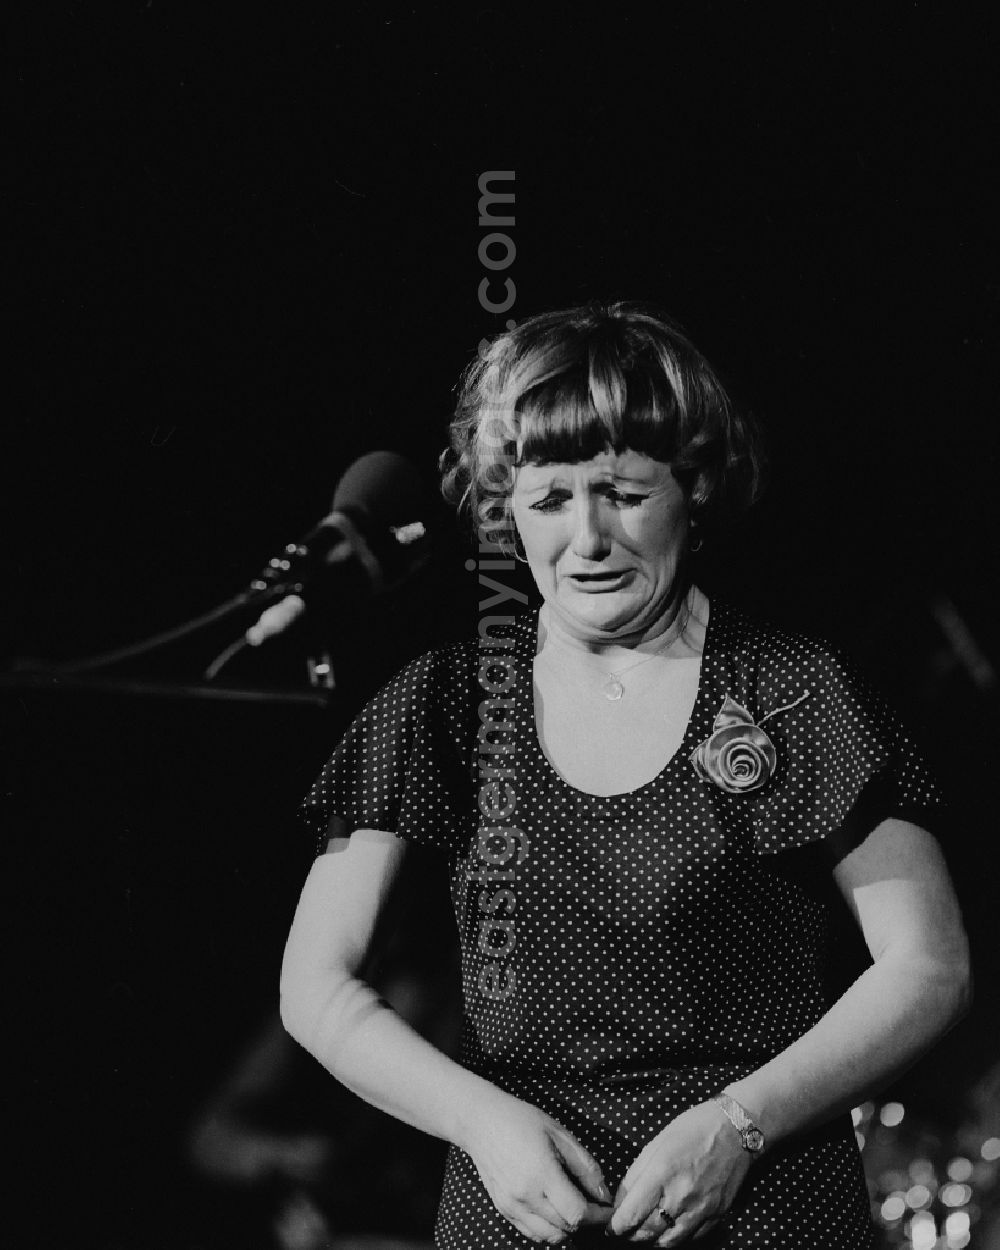 GDR photo archive: Chemnitz - The entertainer, comedienne, singer and actress Helga Hahnemann (1937 - 1991) during a performance at the 3rd Artists Competition in the former Karl-Marx-city today Chemnitz in Saxony today